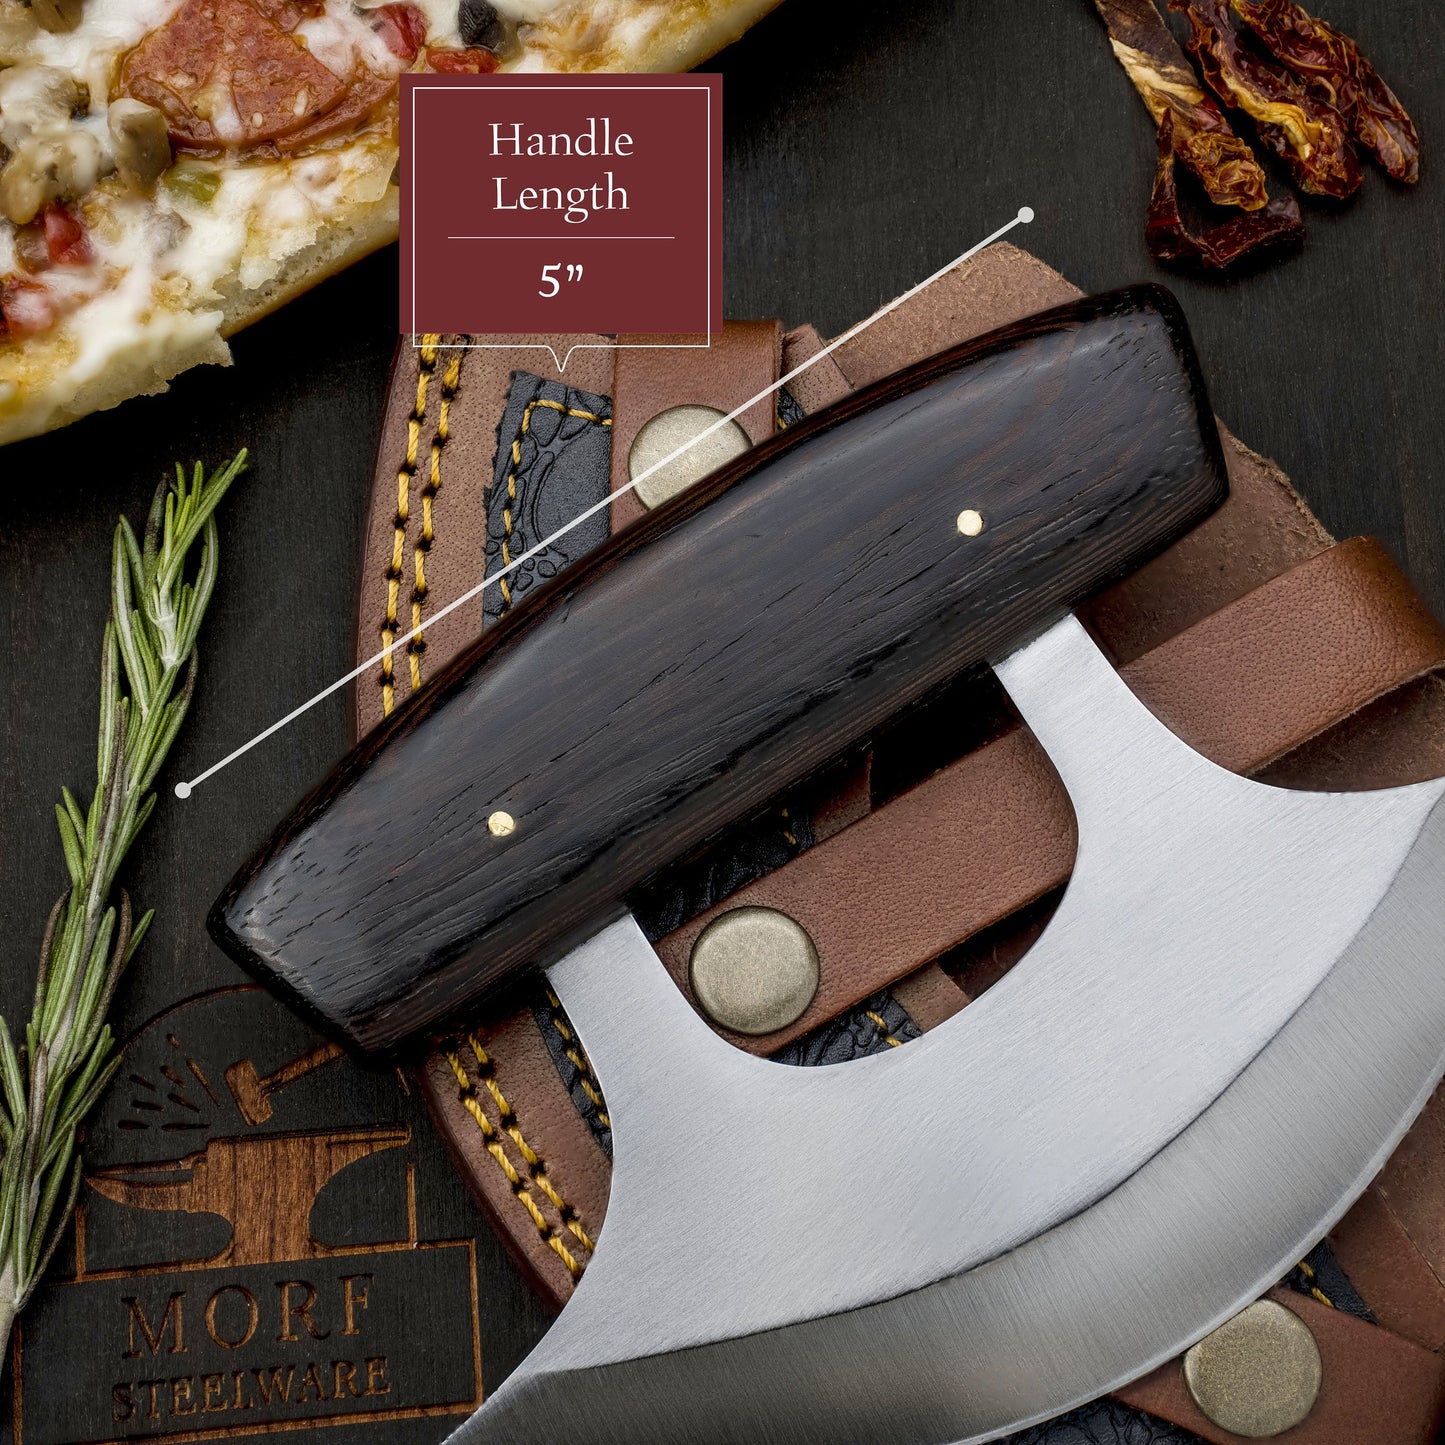 High Carbon Steel Ulu Knife for Indoor/Outdoor Kitchen or Camping Cutlery Brown African Wood Pizza Cutting Slicer by MorfSteelware